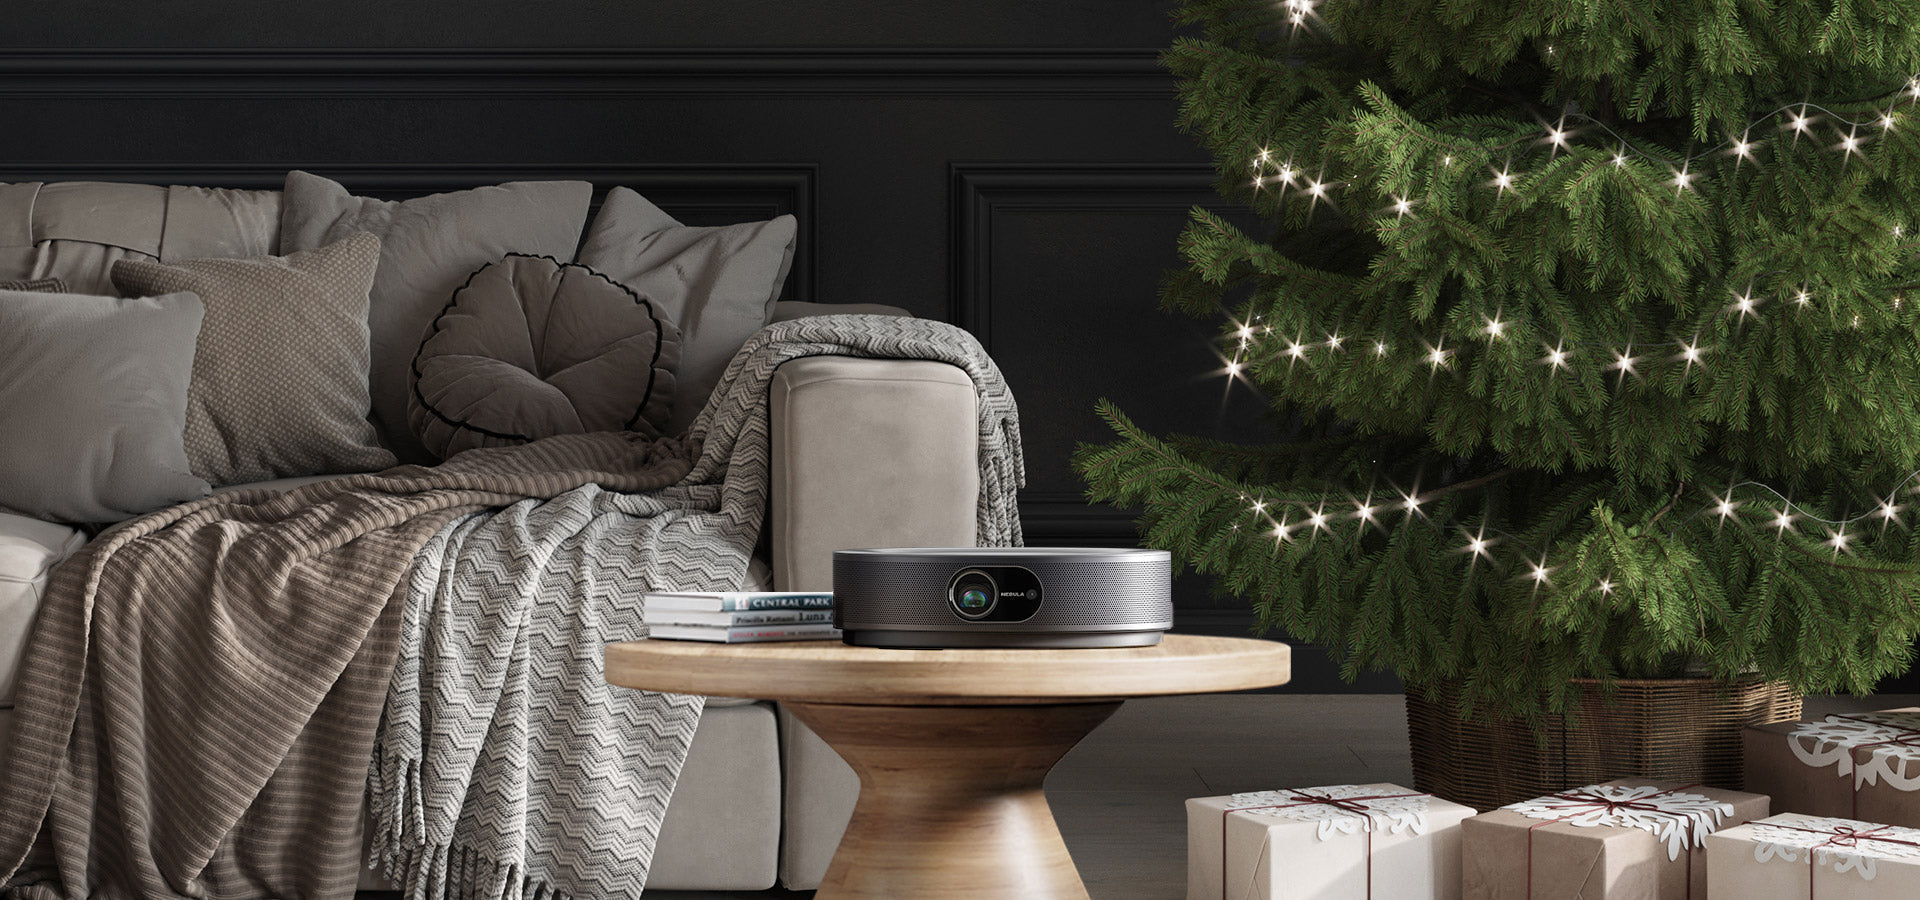 How to Add Some Holiday Spirit to Your Smart Projector